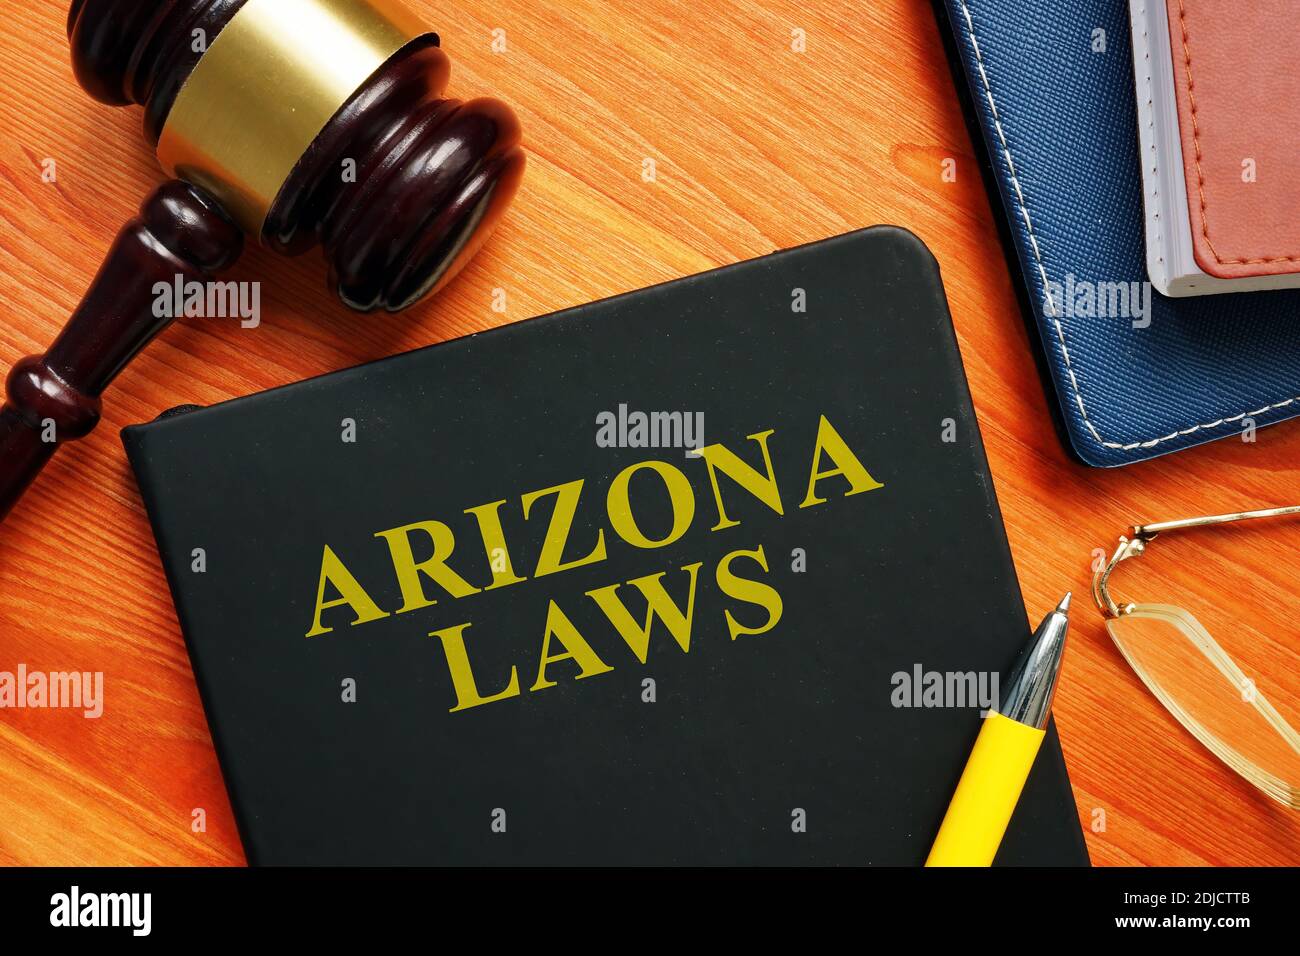 The Arizona law with gavel and papers. Stock Photo